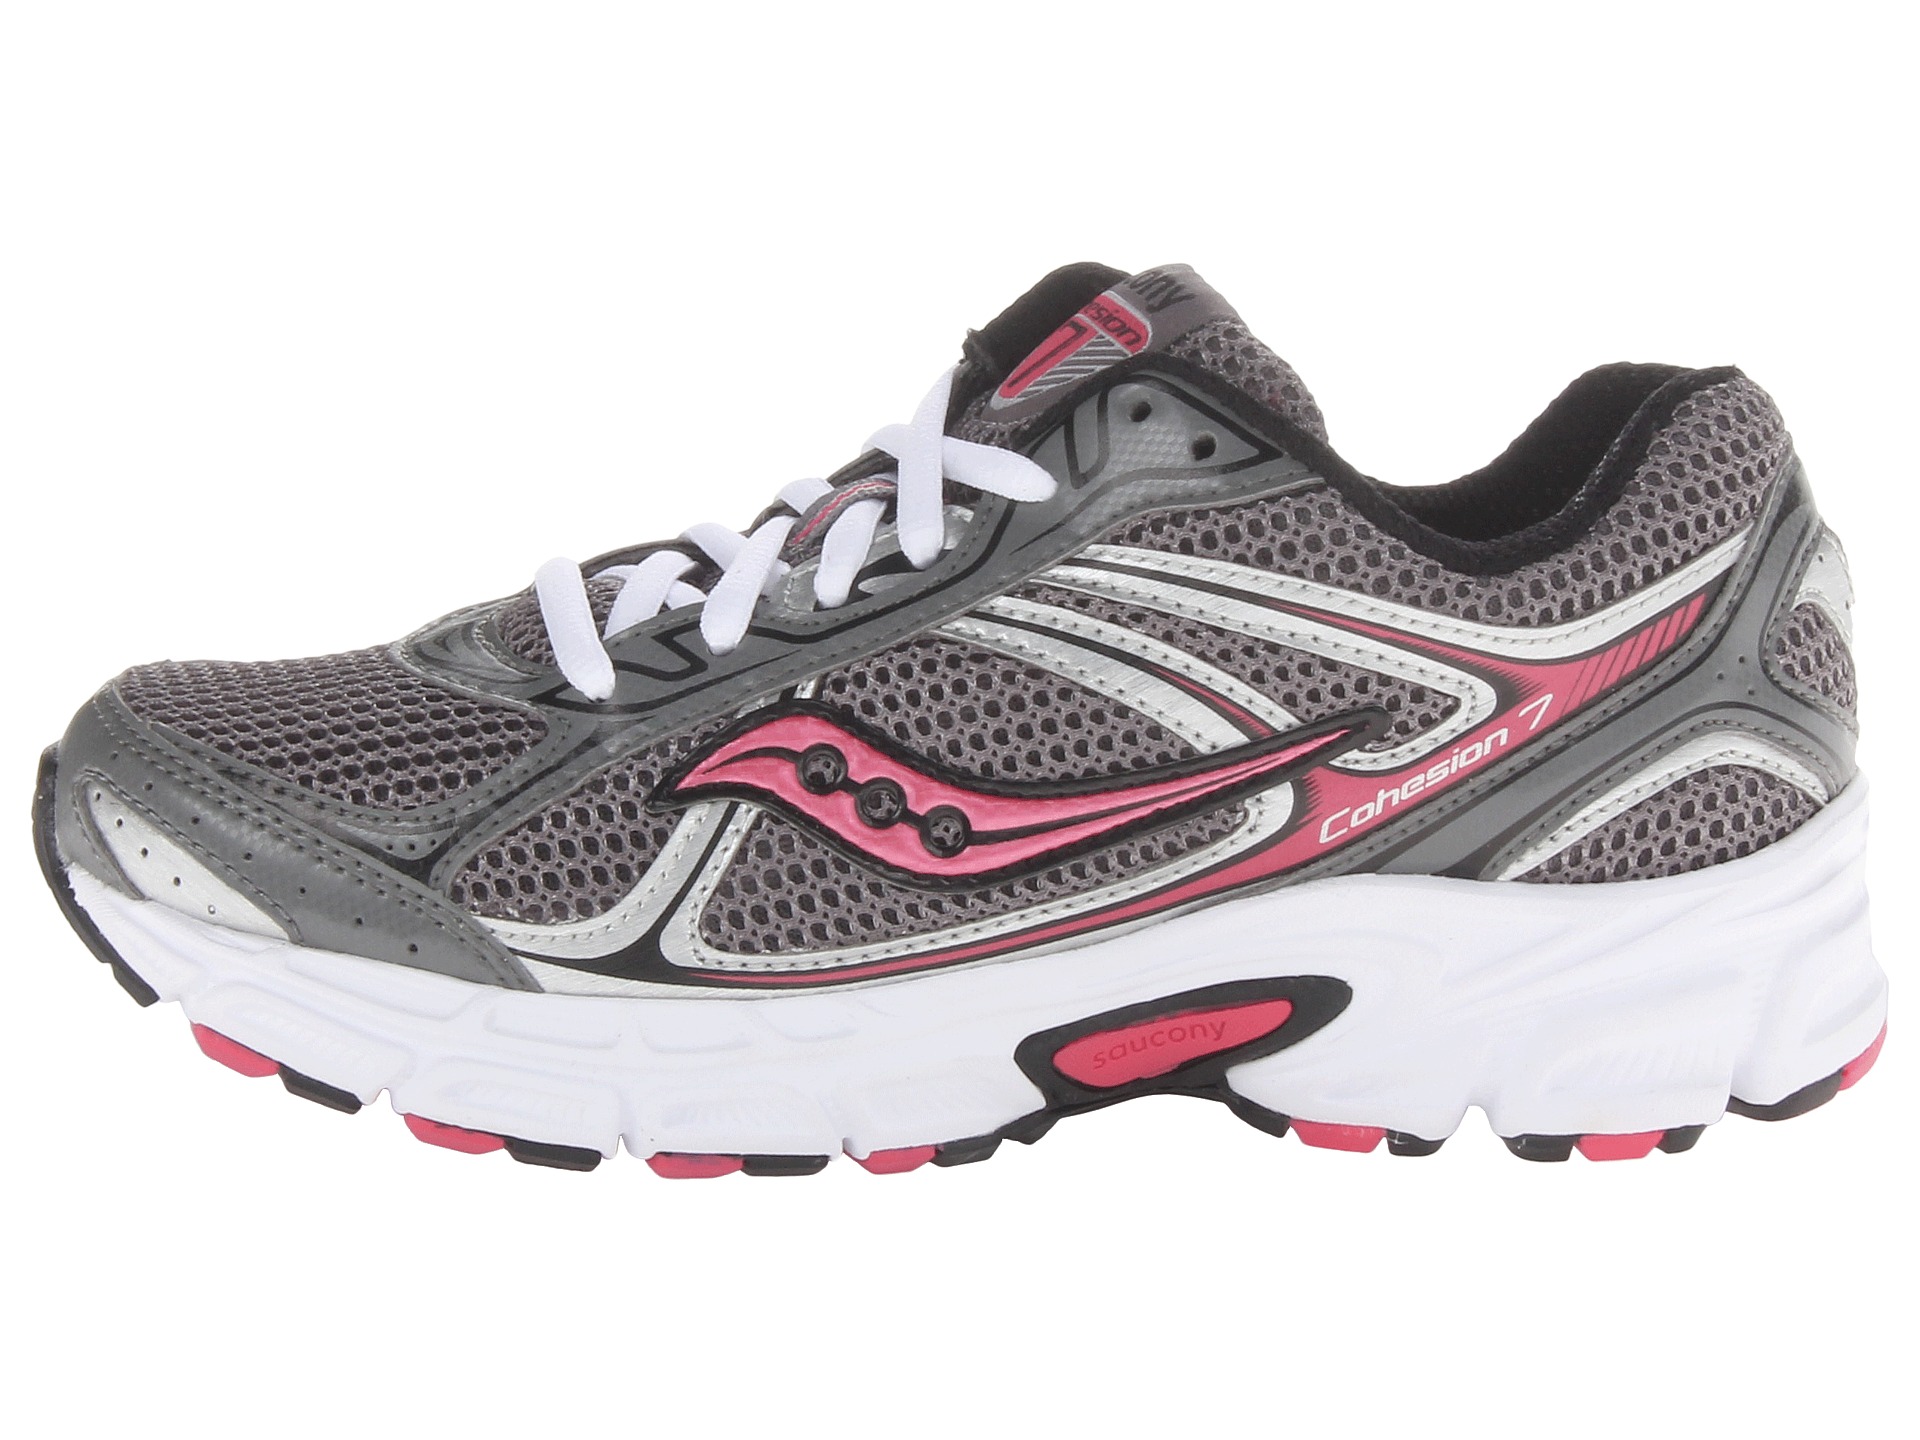 Saucony Cohesion 7 Grey Black Pink | Shipped Free at Zappos